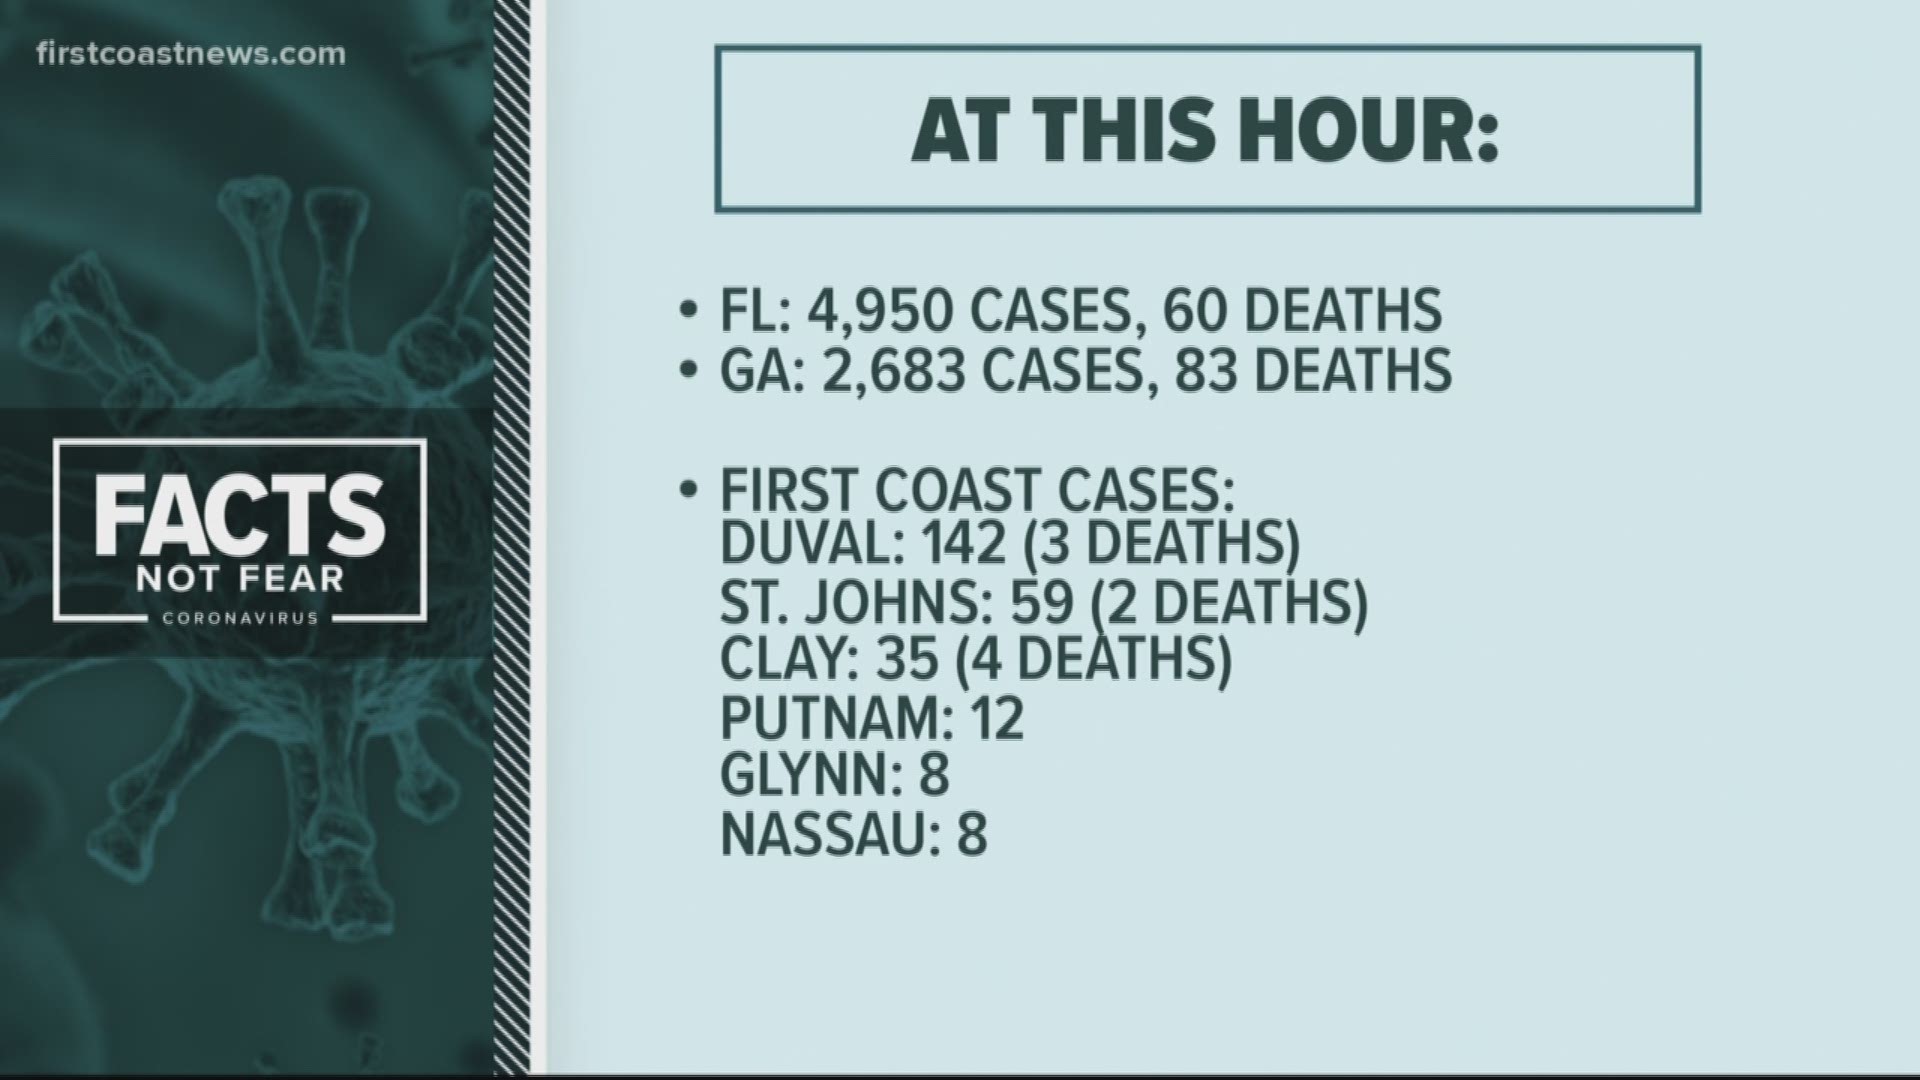 There have been over 60 COVID-19 related deaths in the state of Florida.